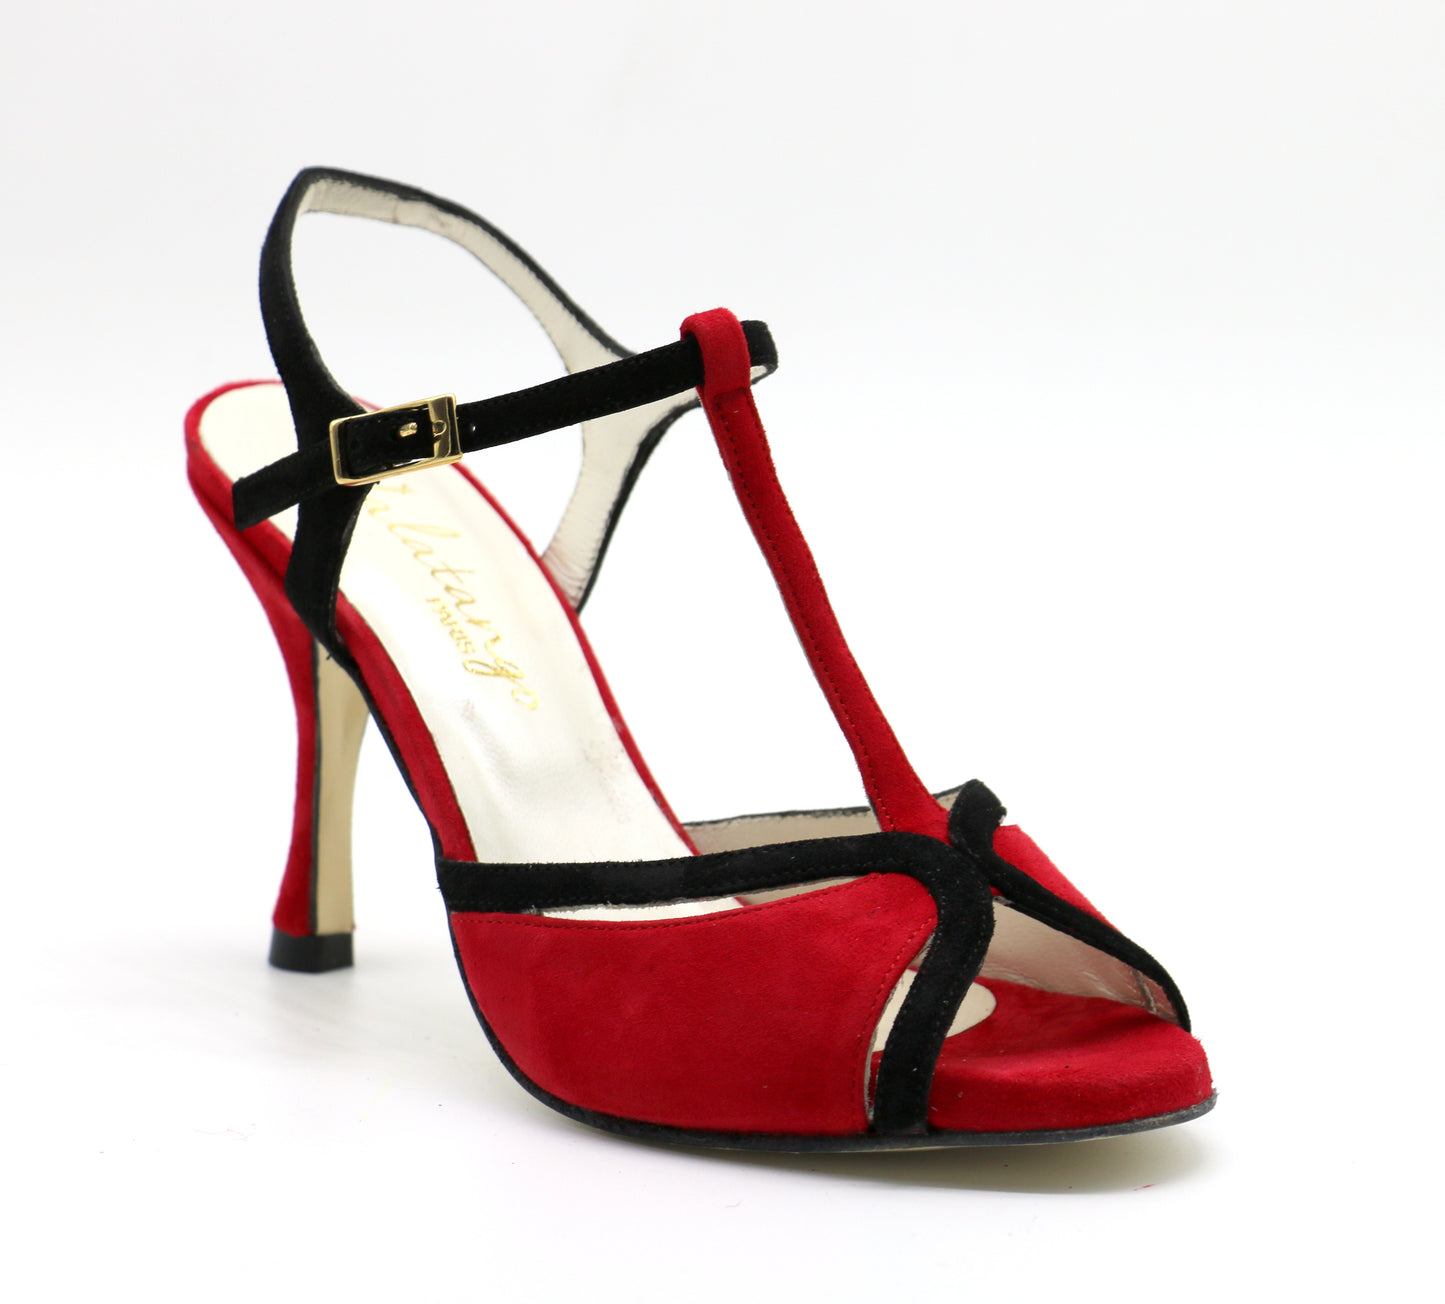 Salome red and black heels 8cm